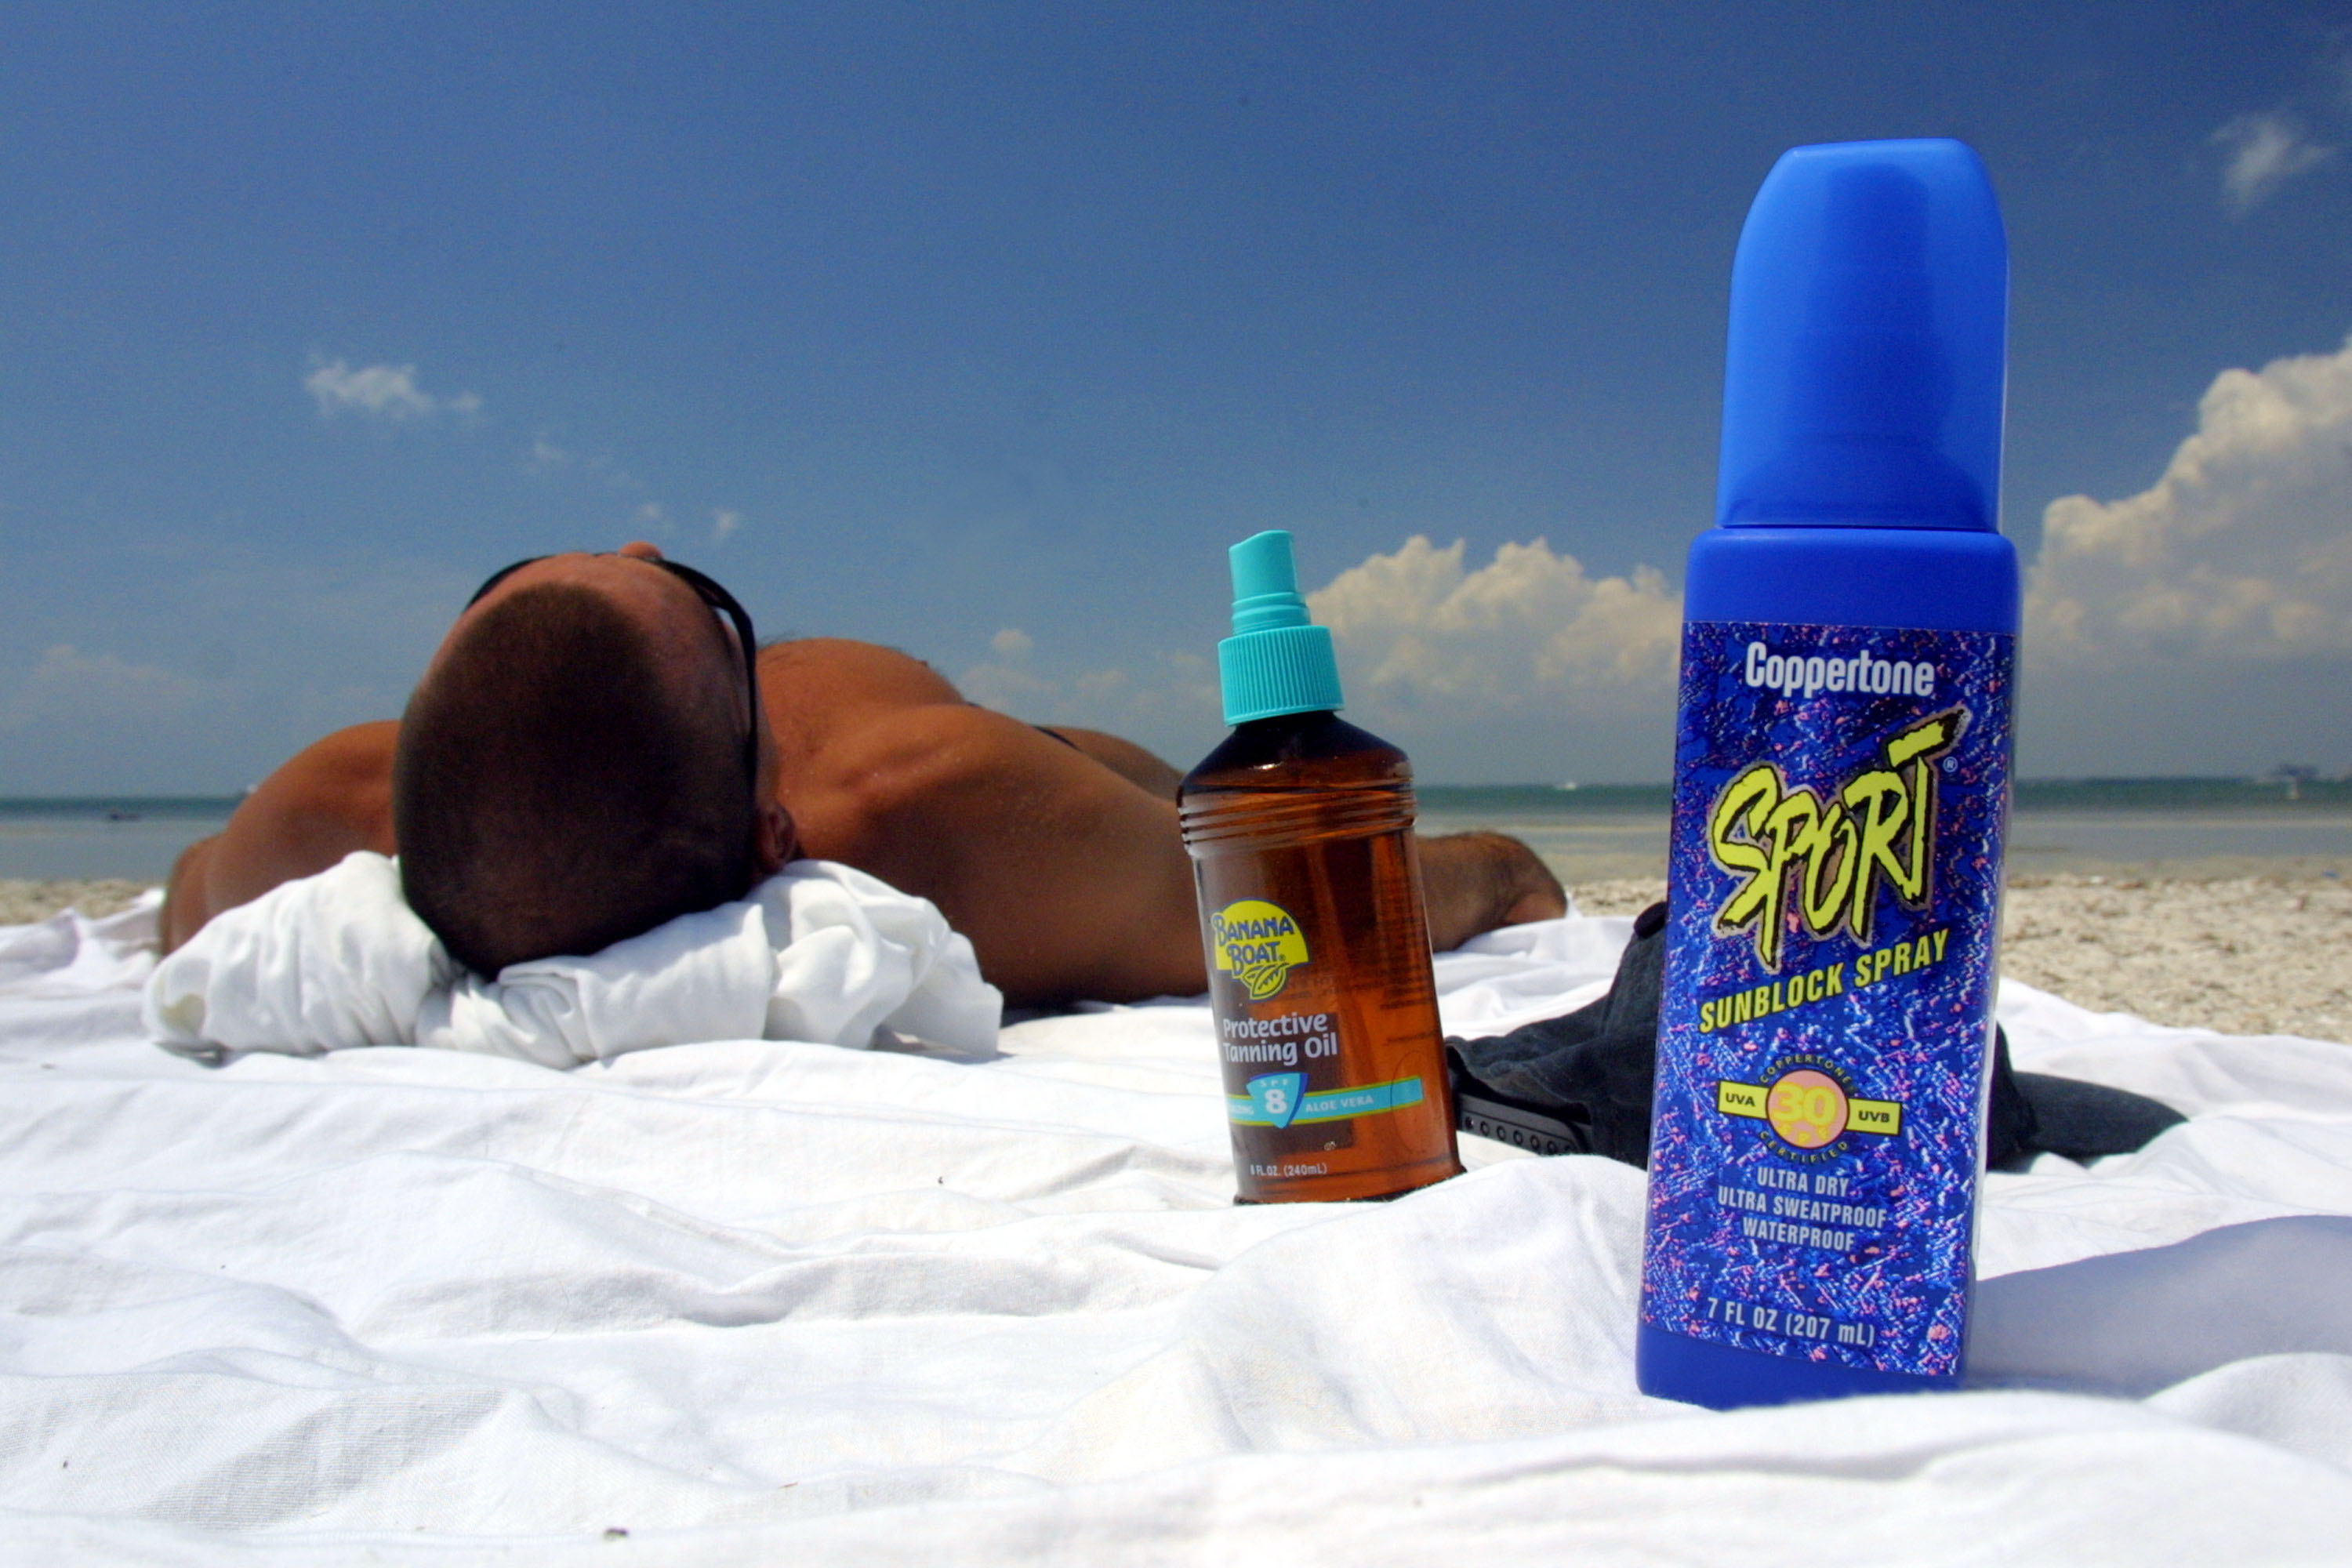 More concerns raised about quality of American sunscreens